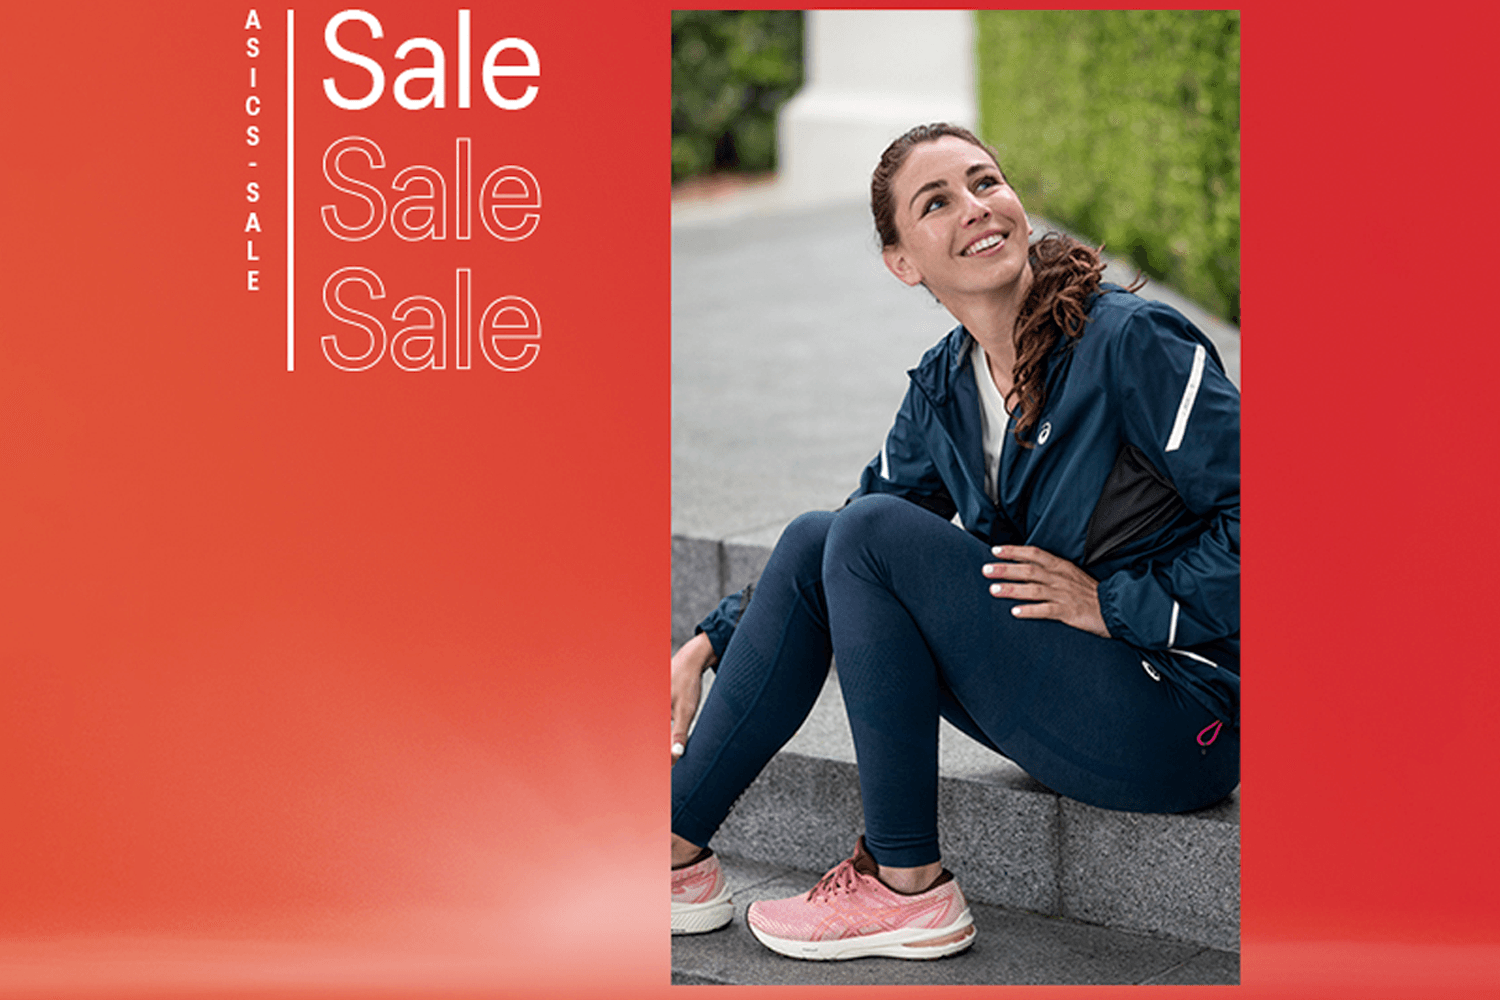 Up to 40% off at ASICS with this wintery sale